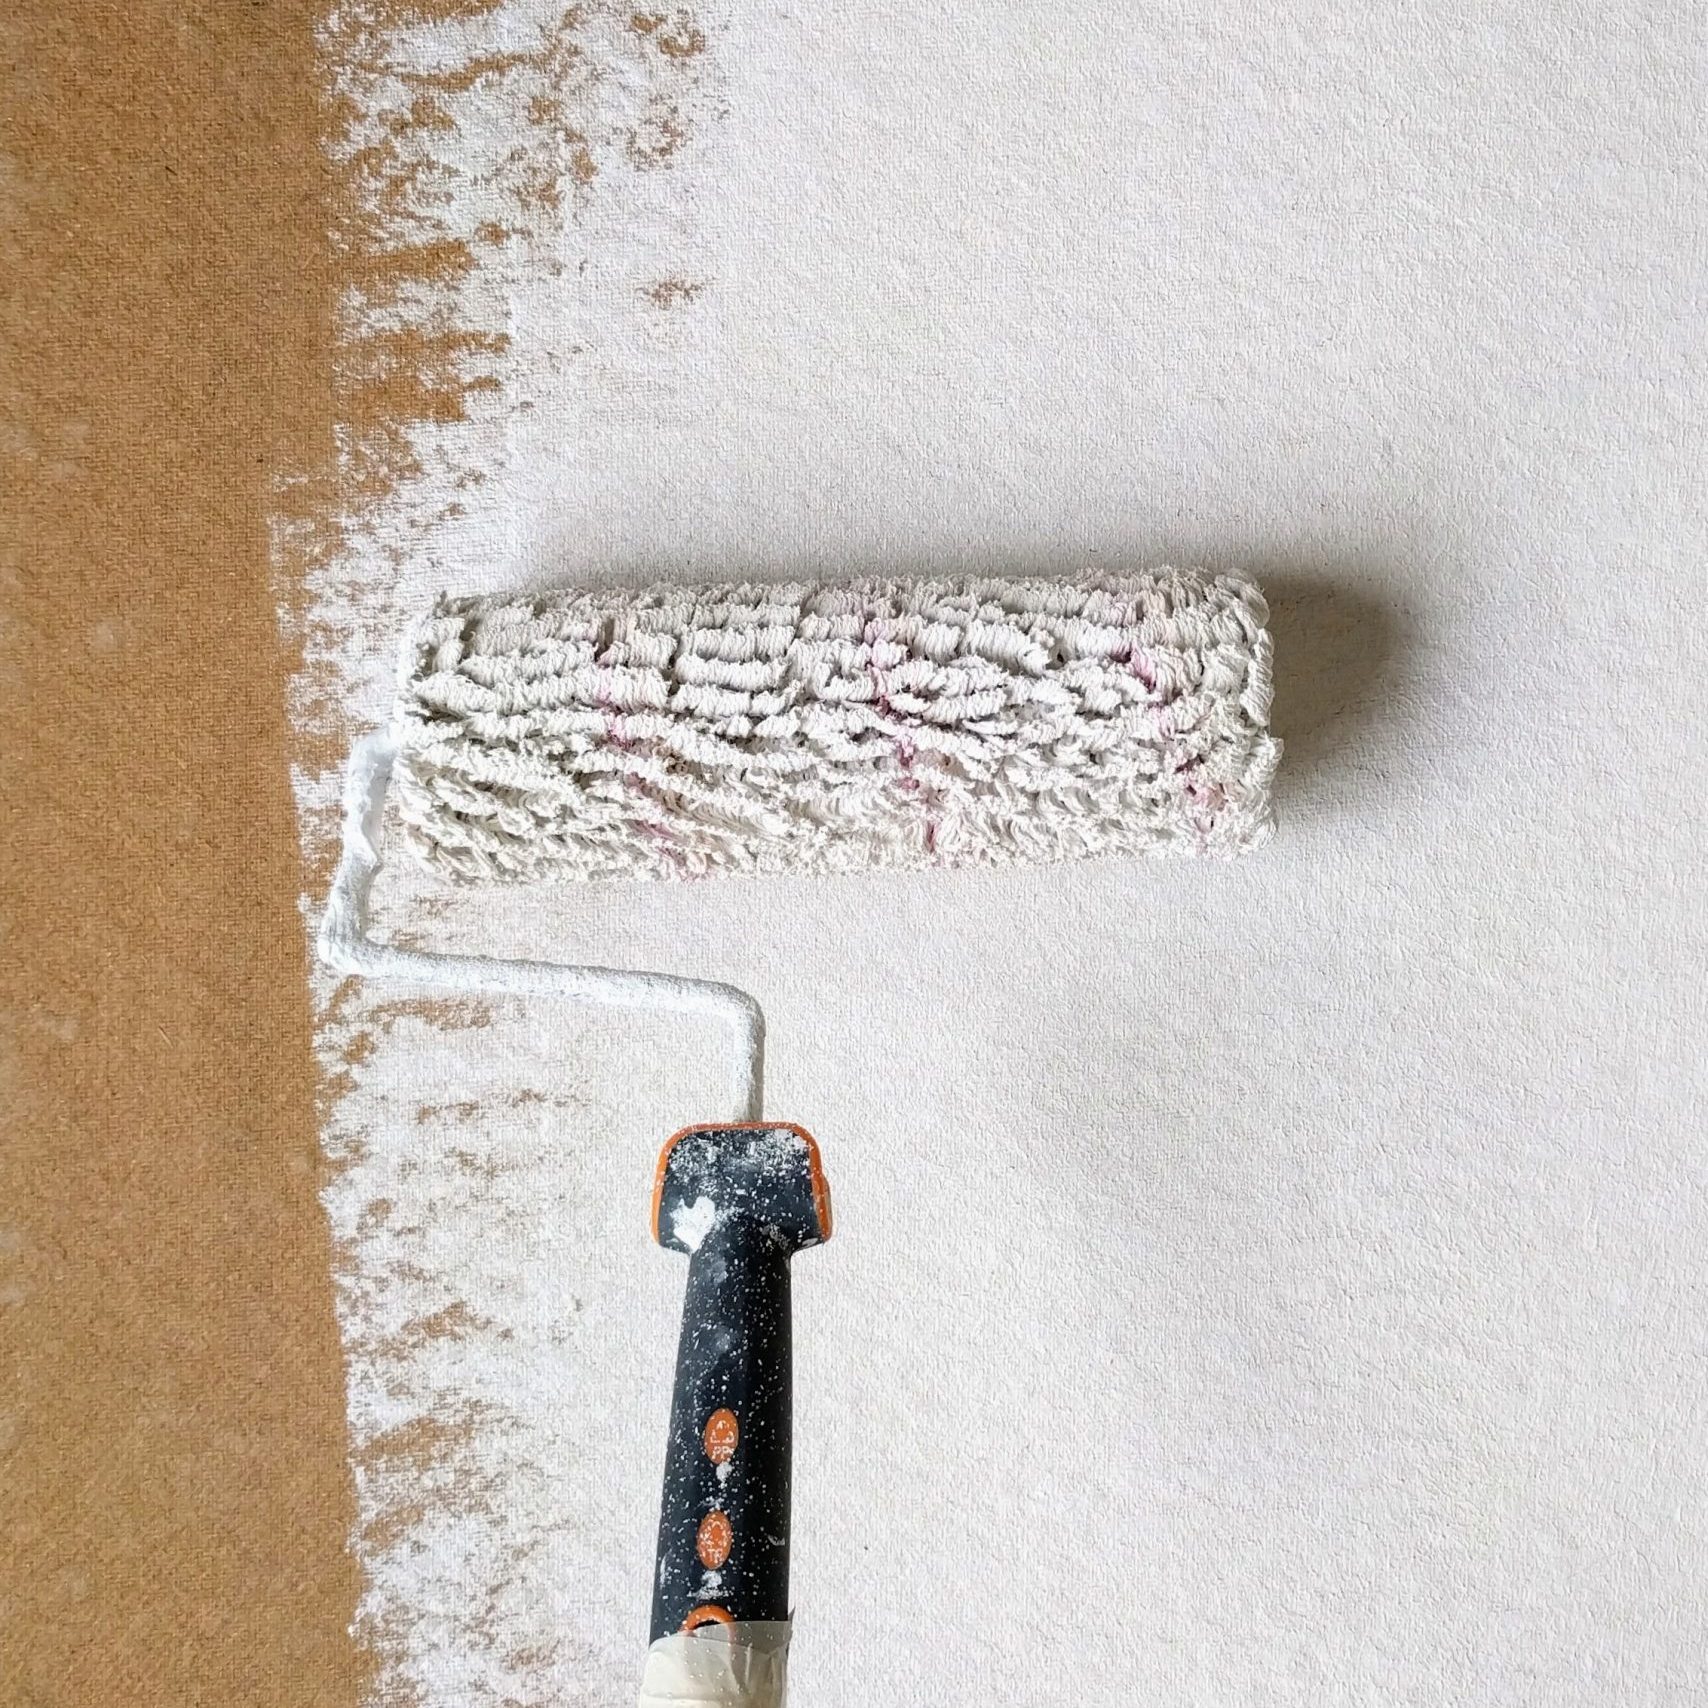 Reusing Paint Rollers and 9 Other Green Tips